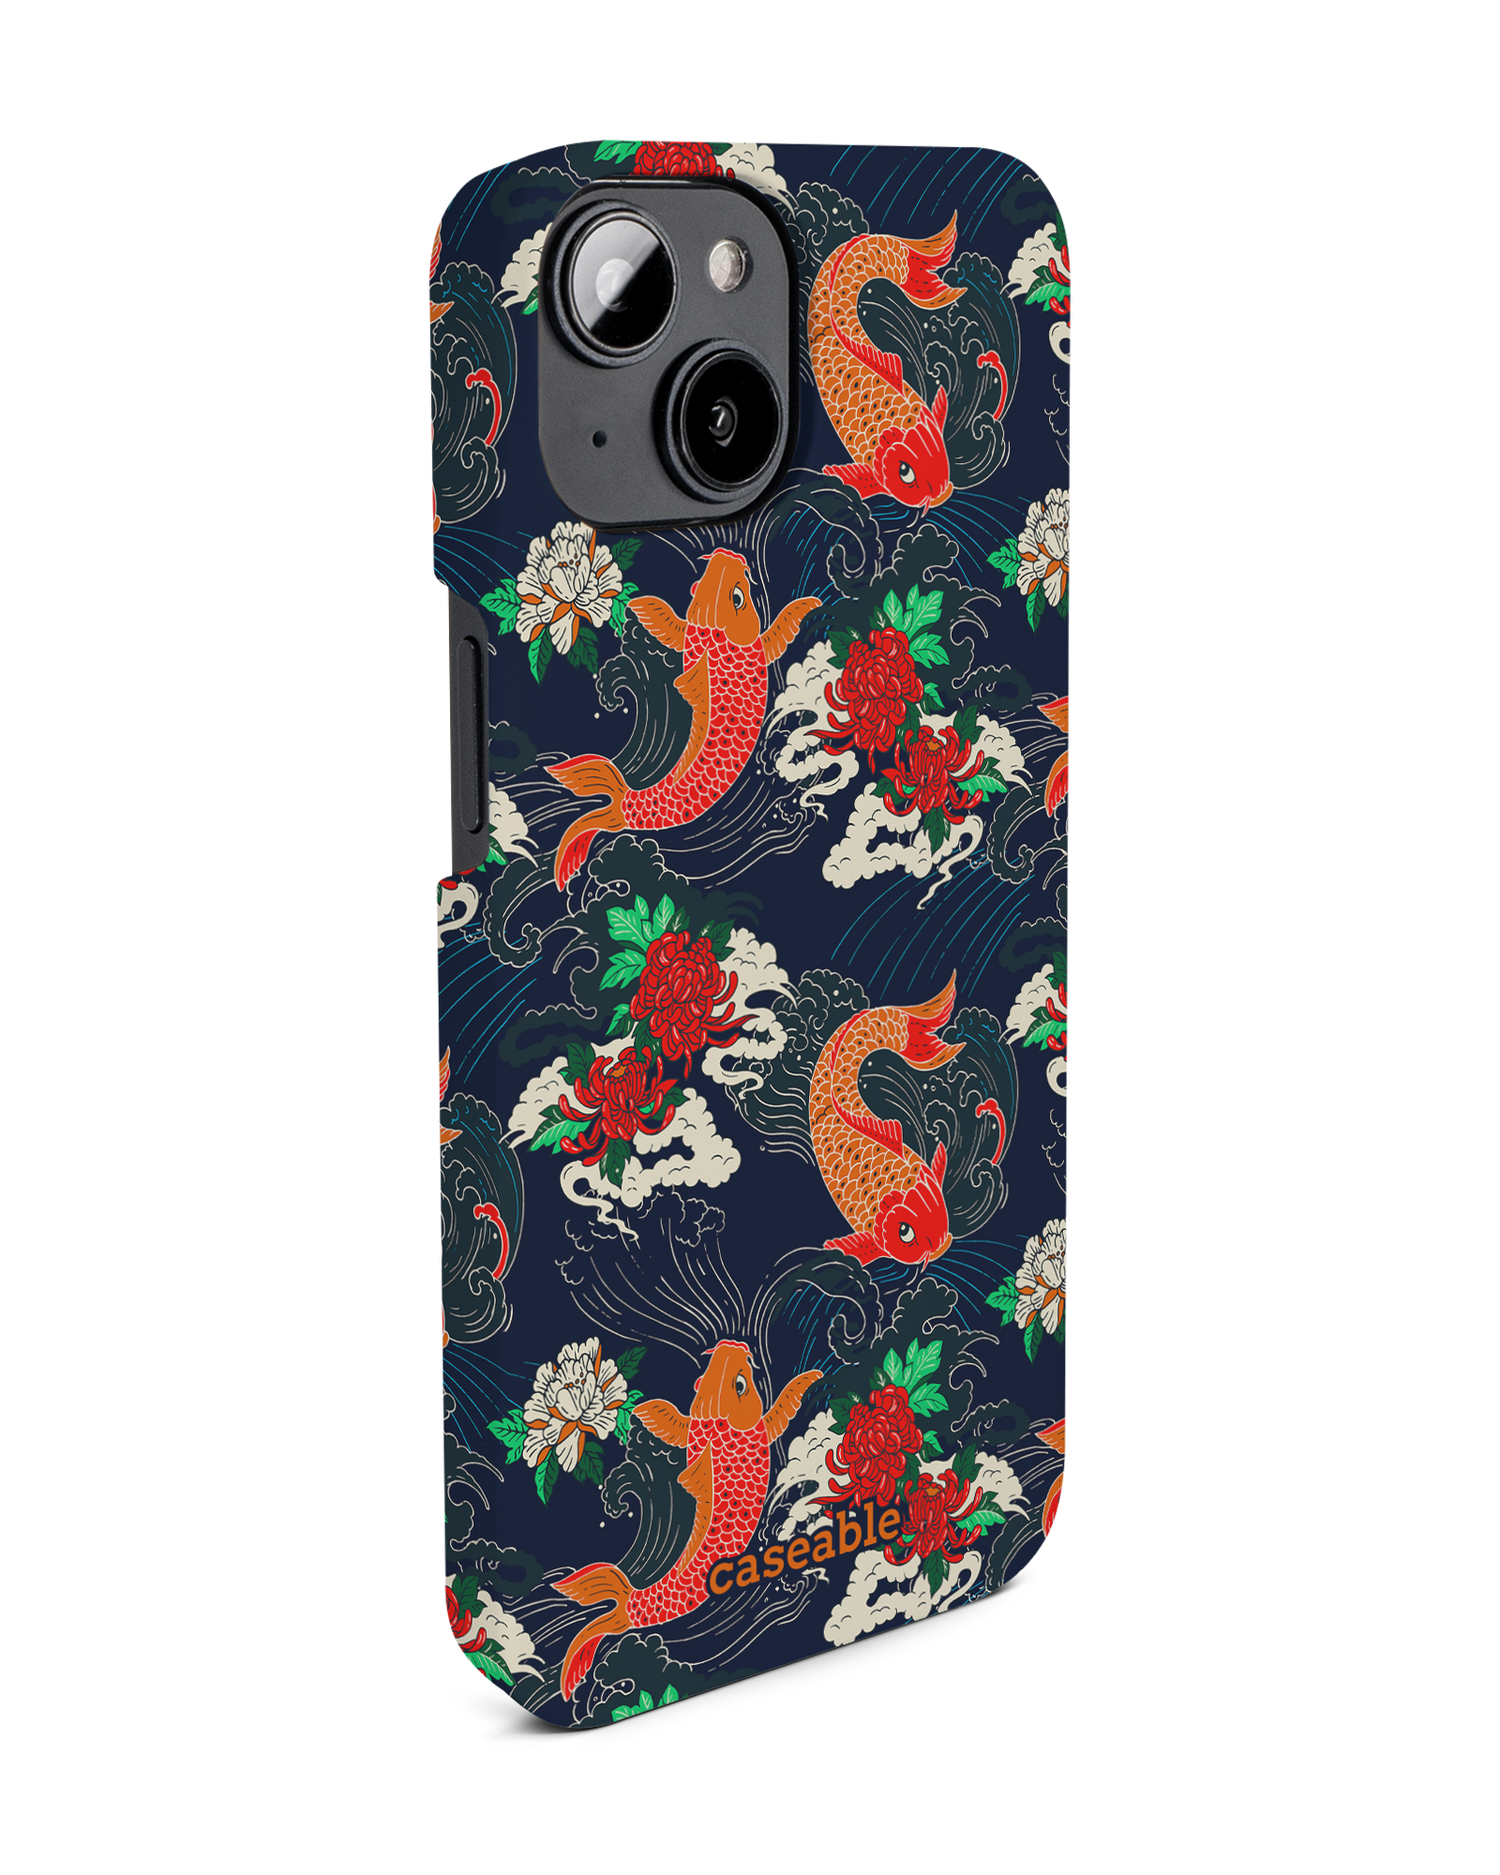 Repeating Koi Hard Shell Phone Case for Apple iPhone 14: View from the left side